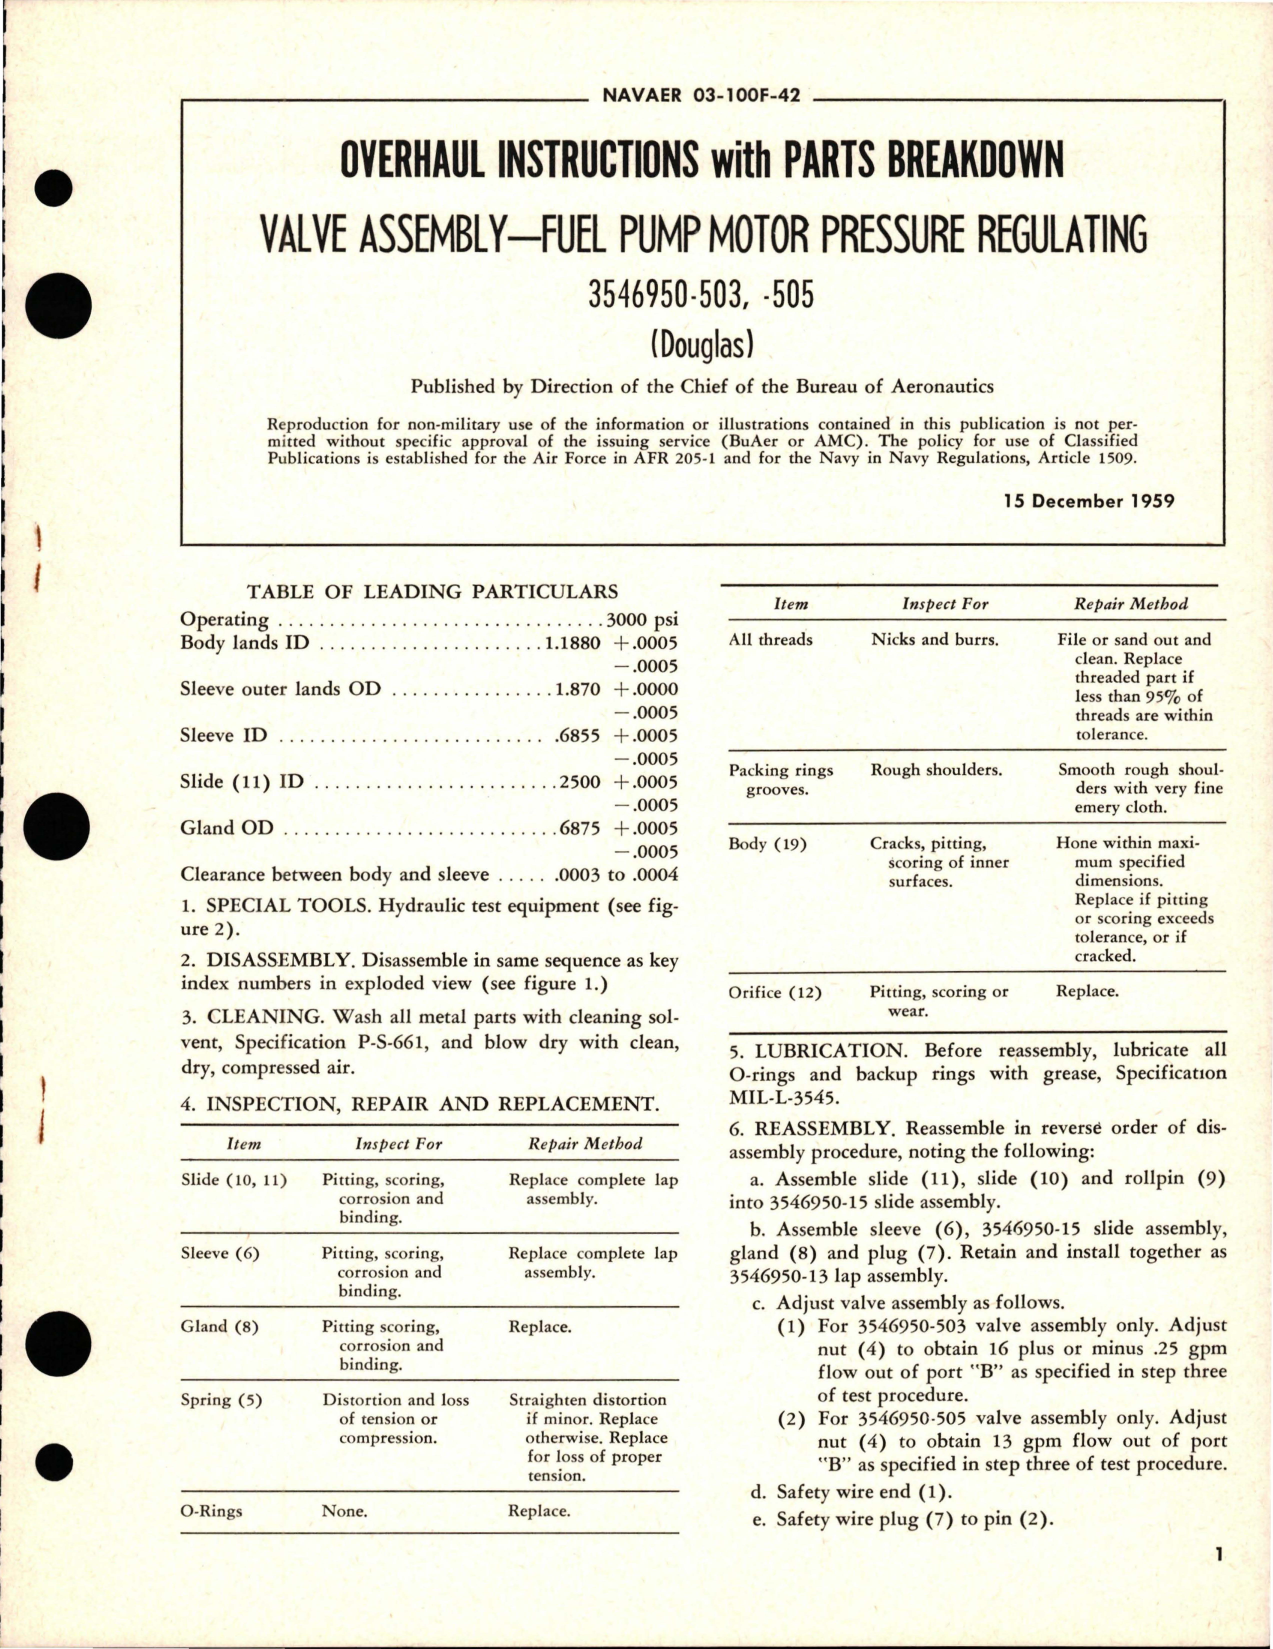 Sample page 1 from AirCorps Library document: Overhaul Instructions with Parts Breakdown for Fuel Pump Pressure Regulating Valve Assembly - 3546950-503 and 3546950-505